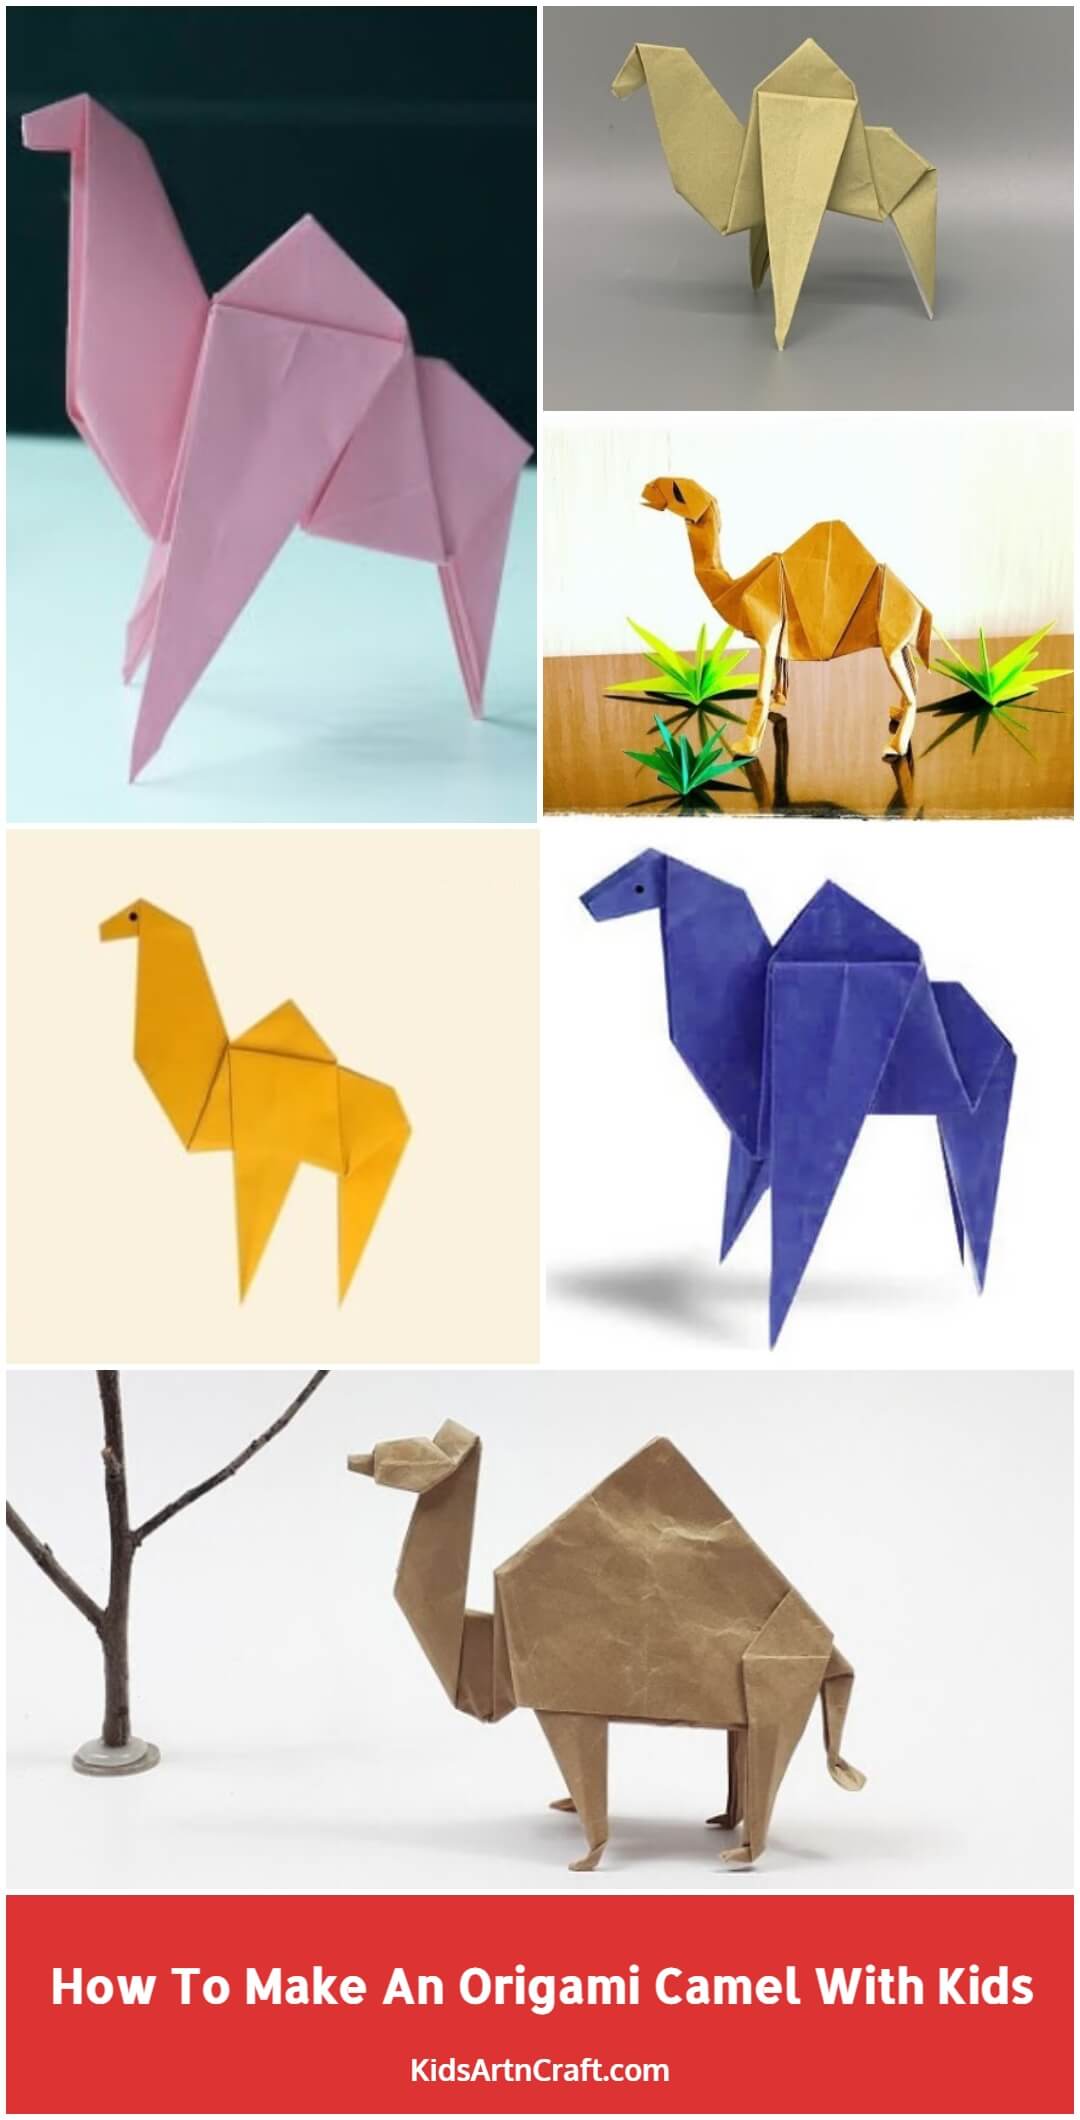 How To Make An Origami Camel With Kids